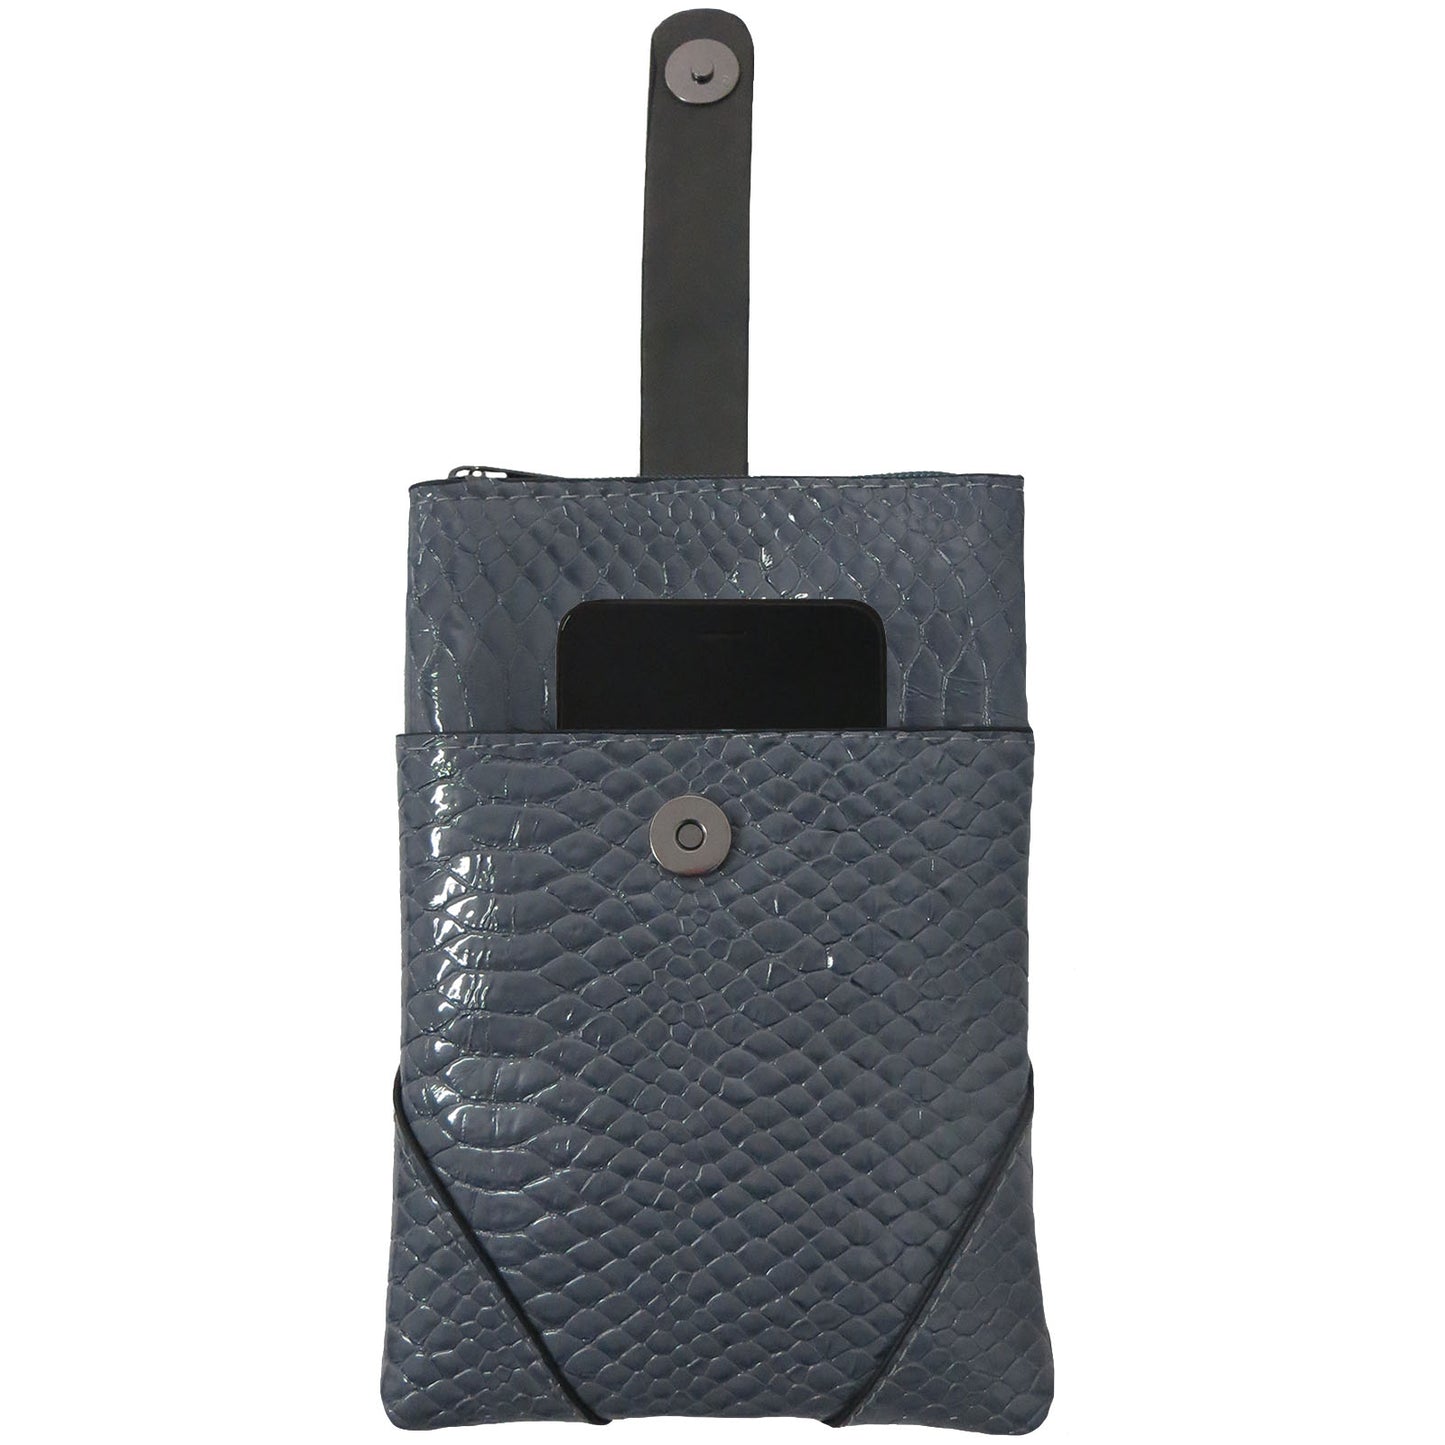 ITEM NUMBER: XB025-LEAH (12 PIECE PACK - $1.75 / PIECE CLEARANCE ITEM - LIMITED QUANTITY) SNAKE PRINT CROSSBODY PHONE BAG